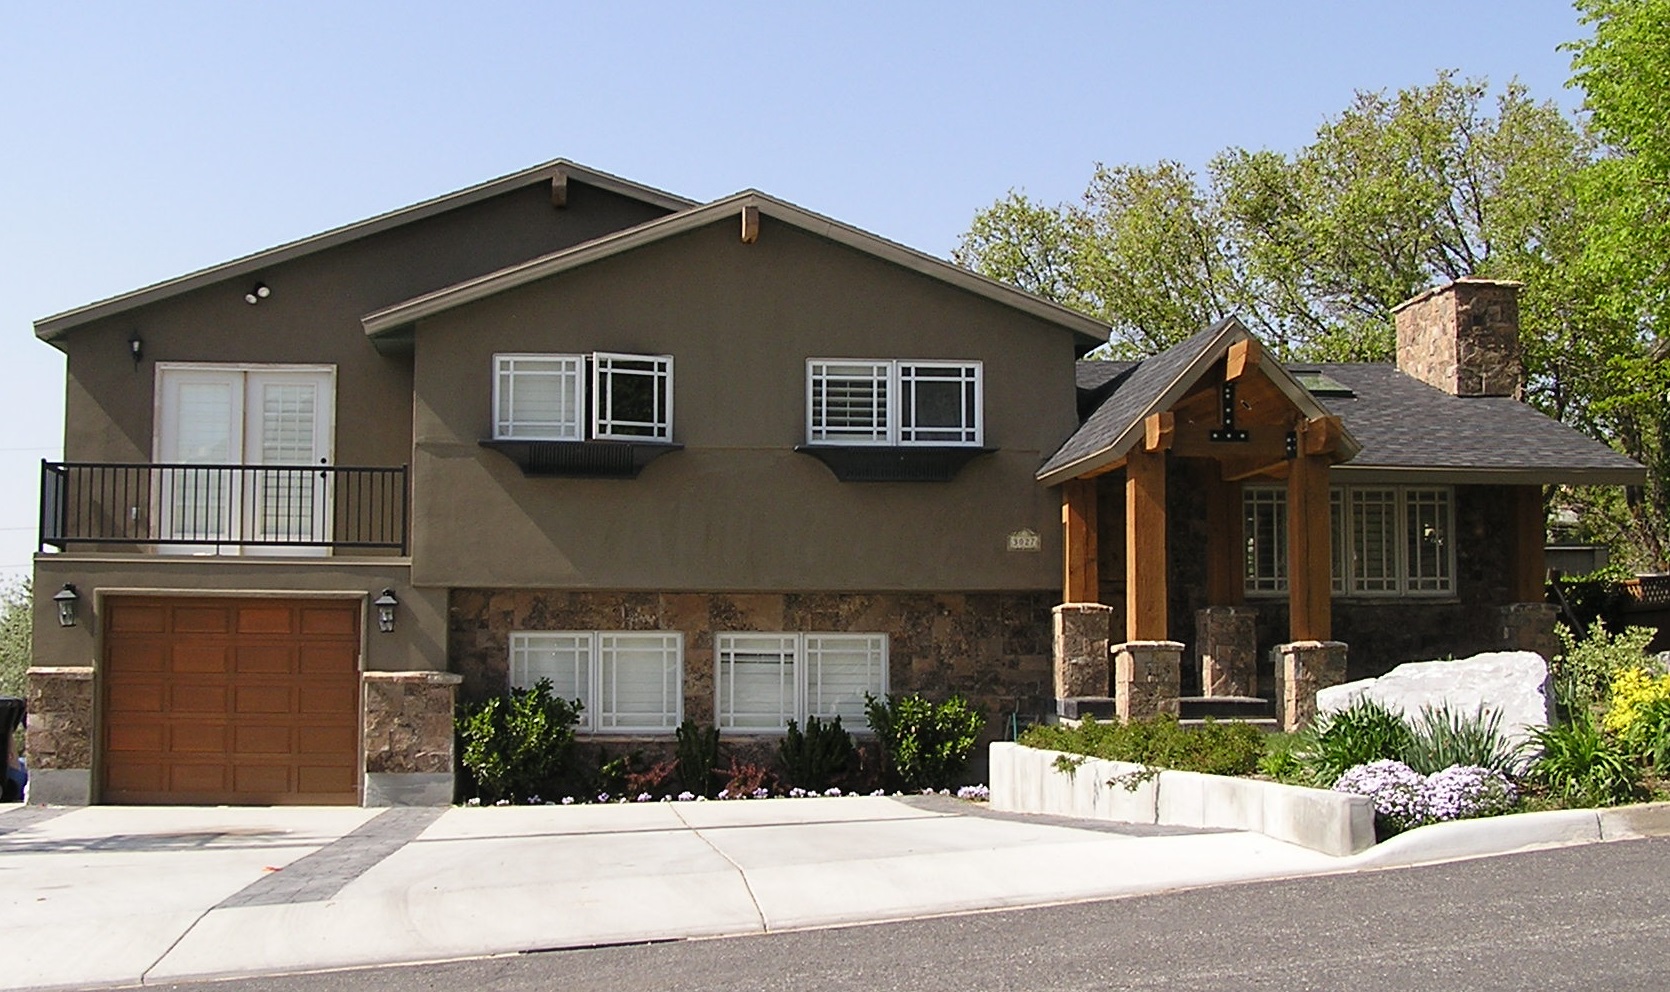 Home Additions & Remodeling Contractor in Salt Lake and Summit County, Utah